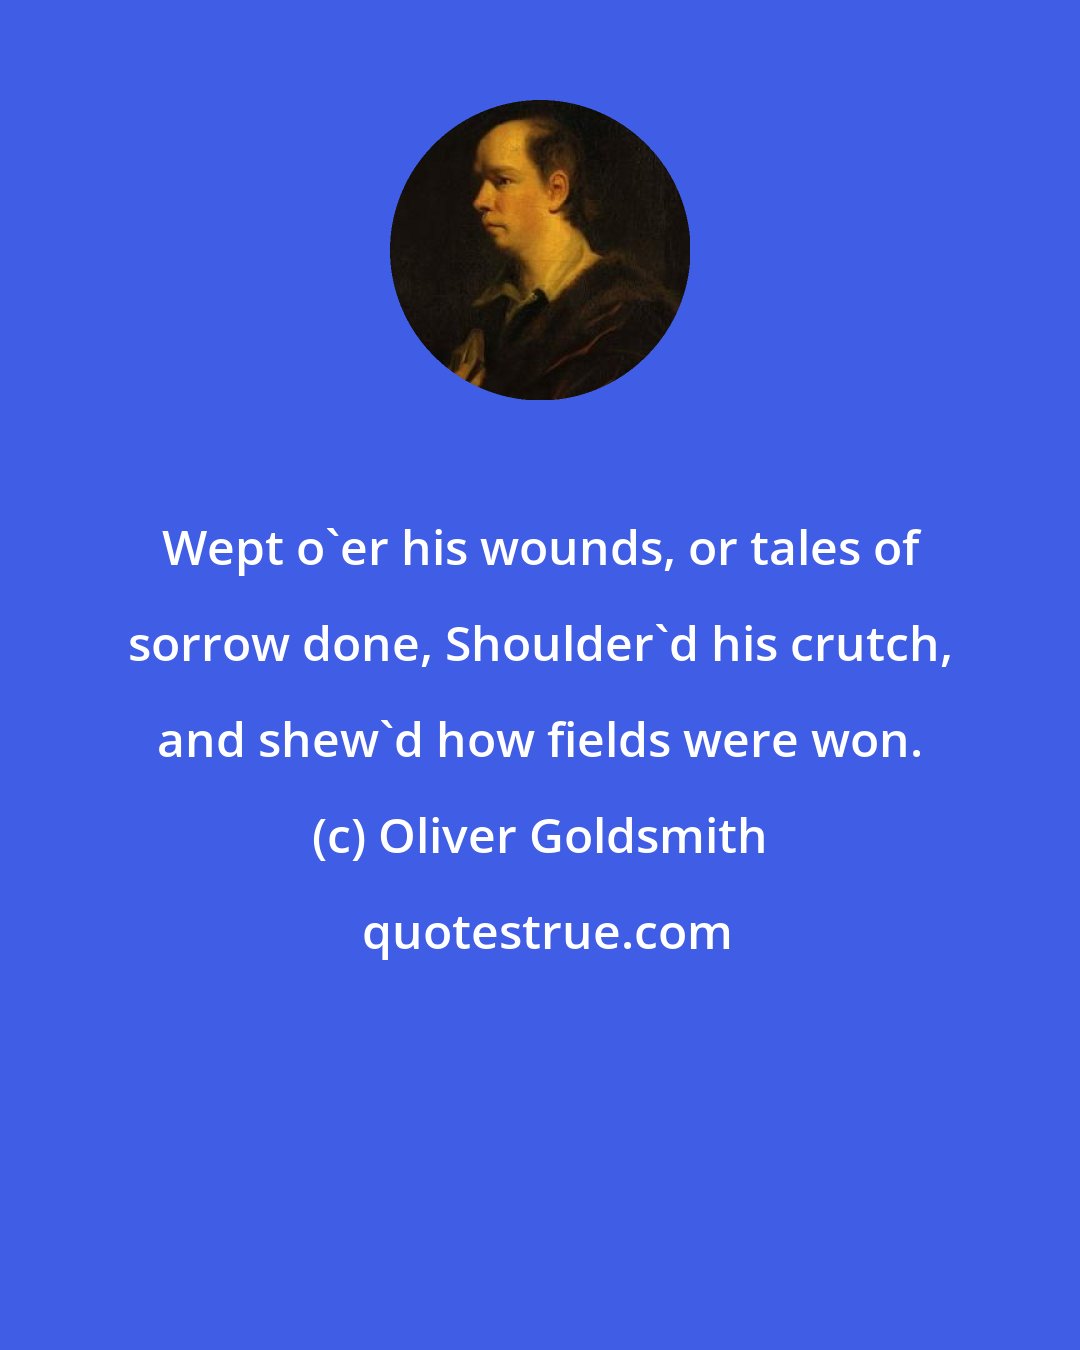 Oliver Goldsmith: Wept o'er his wounds, or tales of sorrow done, Shoulder'd his crutch, and shew'd how fields were won.